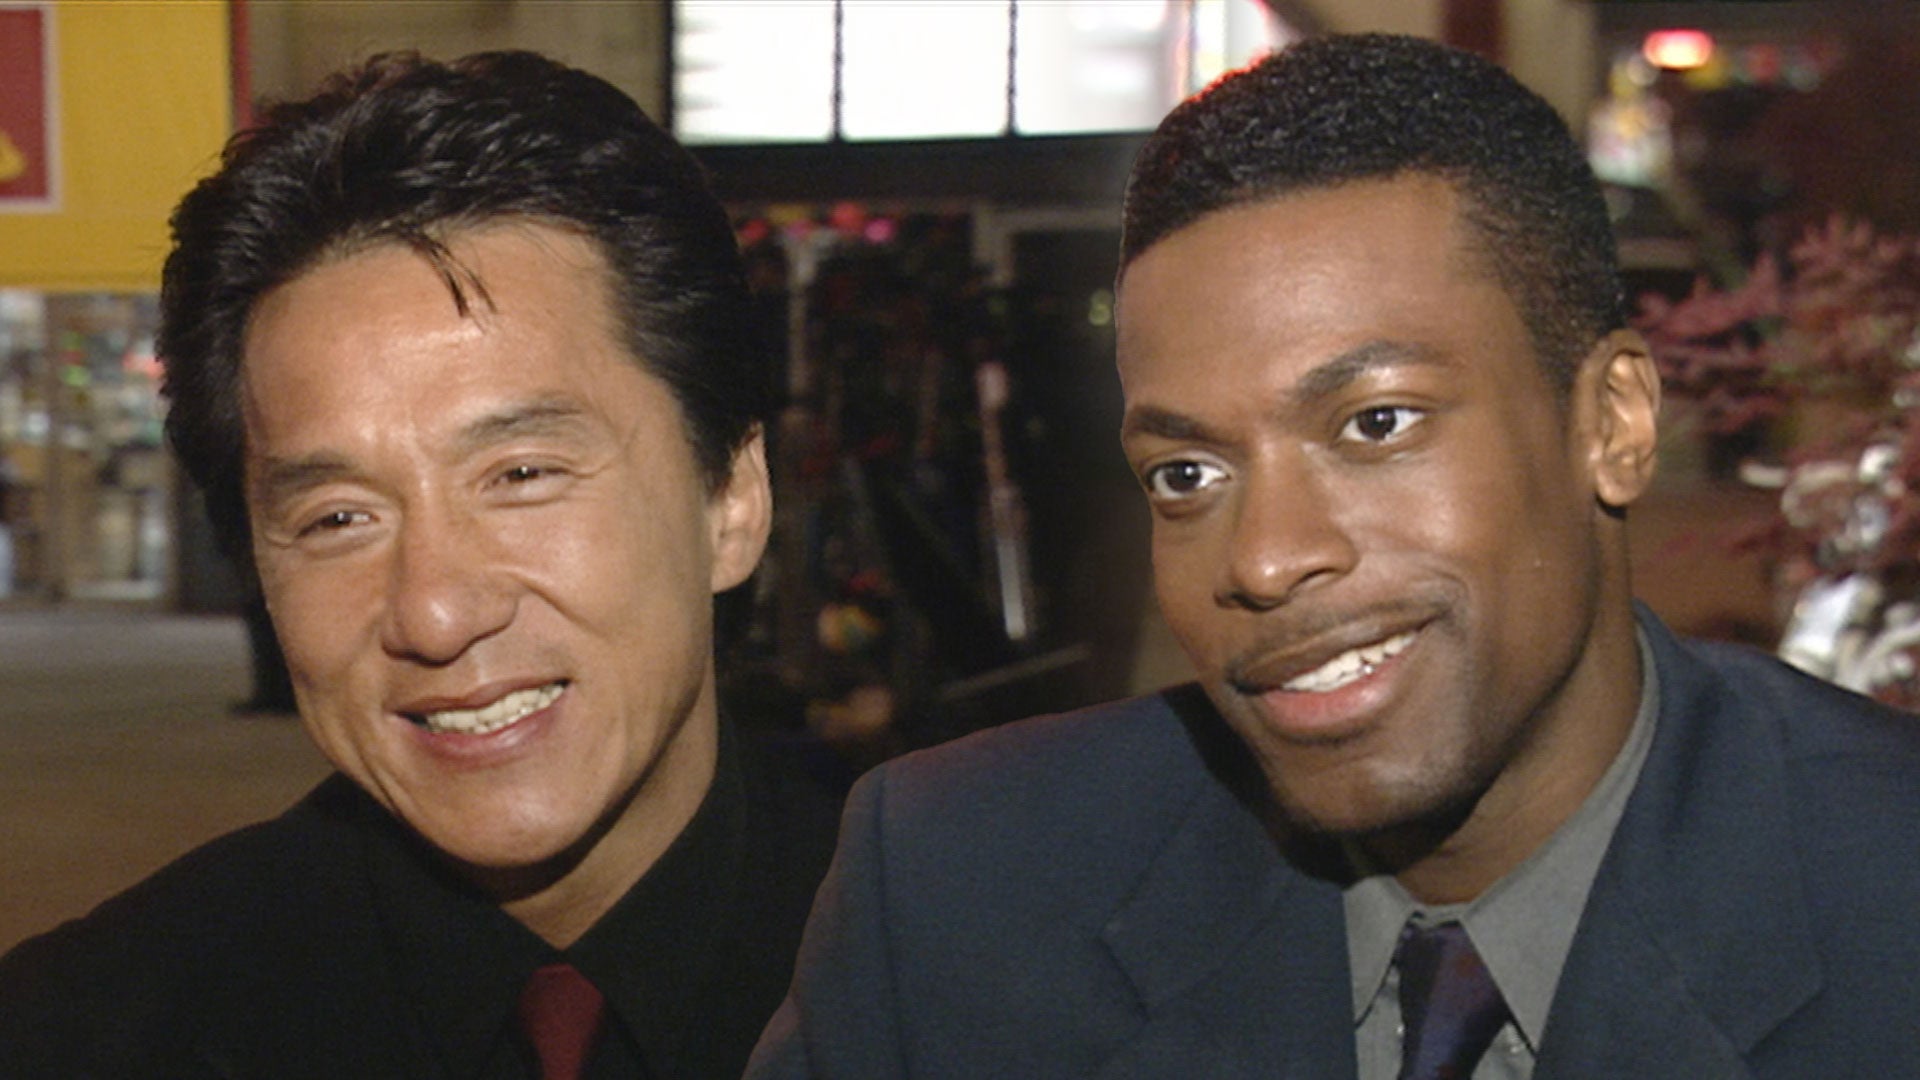 Rush Hour': Chris Tucker and Jackie Chan Tease Each Other During On-Set  Interviews (Flashback)